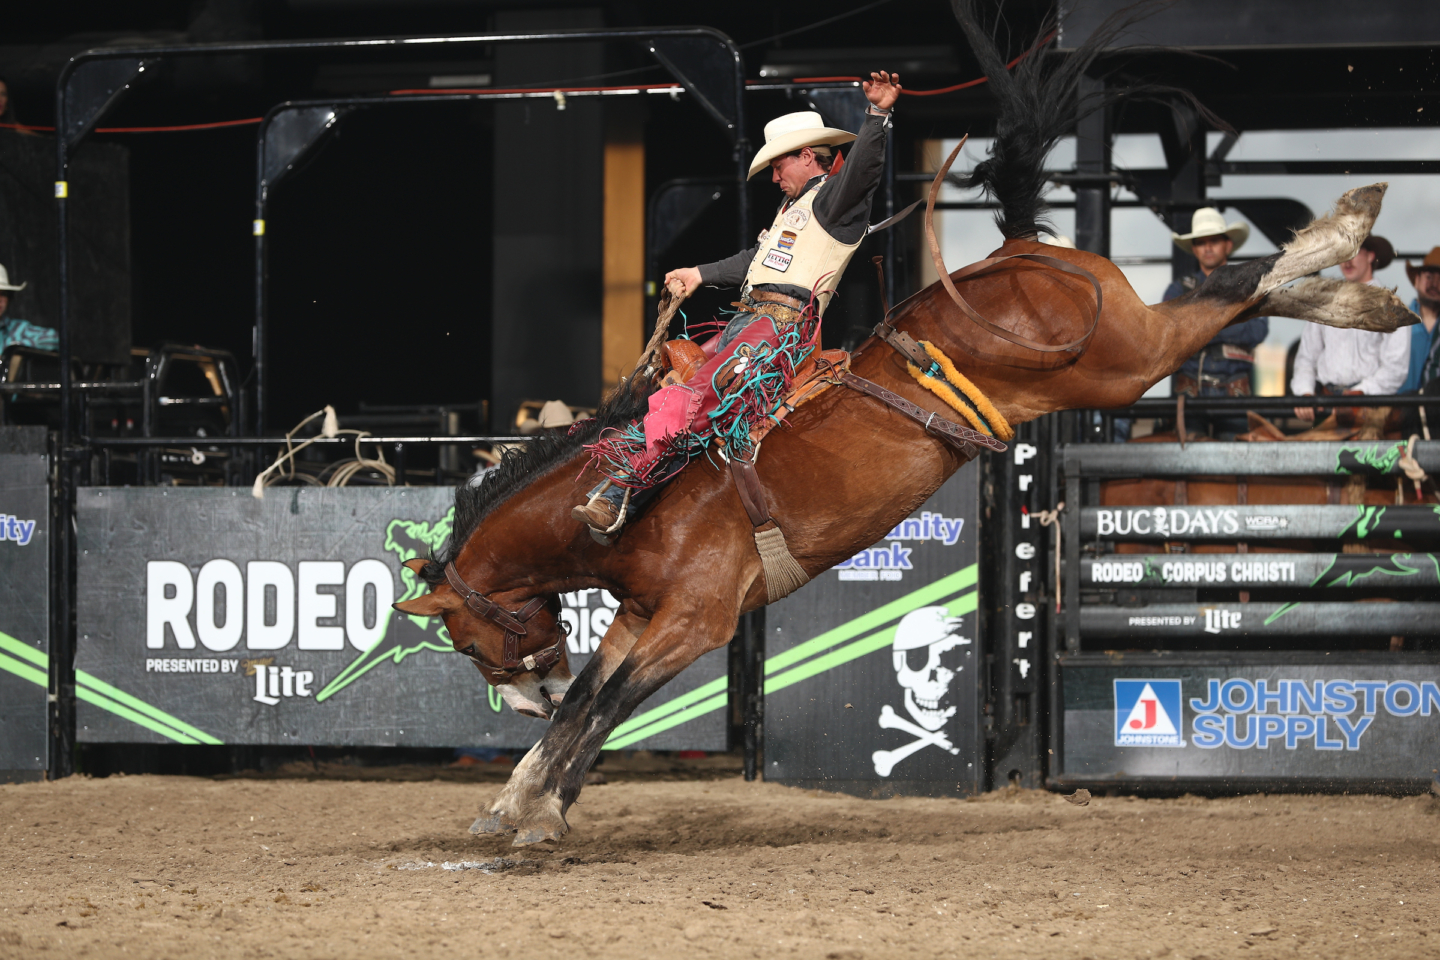 Cole Elshere Opens New Doors with the World Champion’s Rodeo Alliance